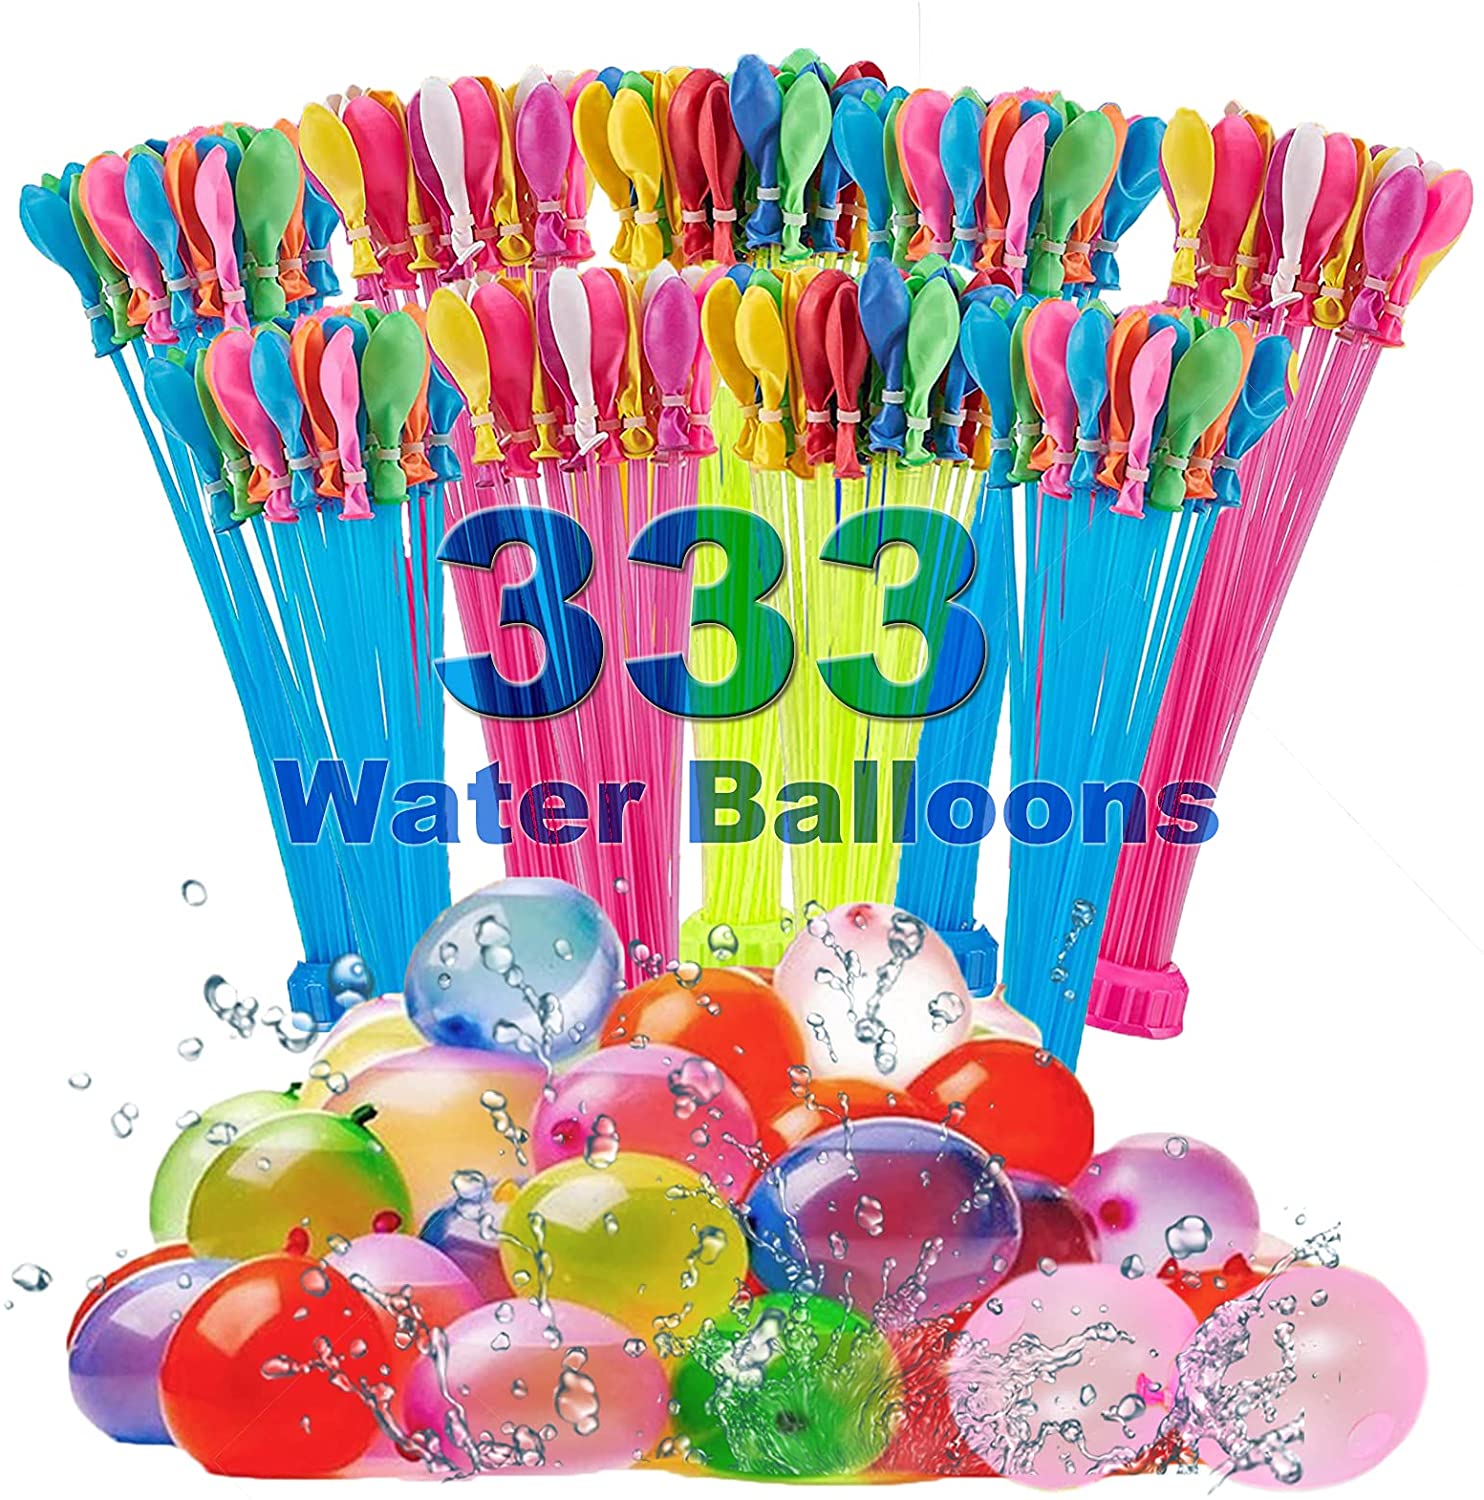 Water Balloons for Kids Boys & Girls Adults Easy Quick Fun Outdoor Summer Splash Party Backyard for Swimming Pool LW398556 